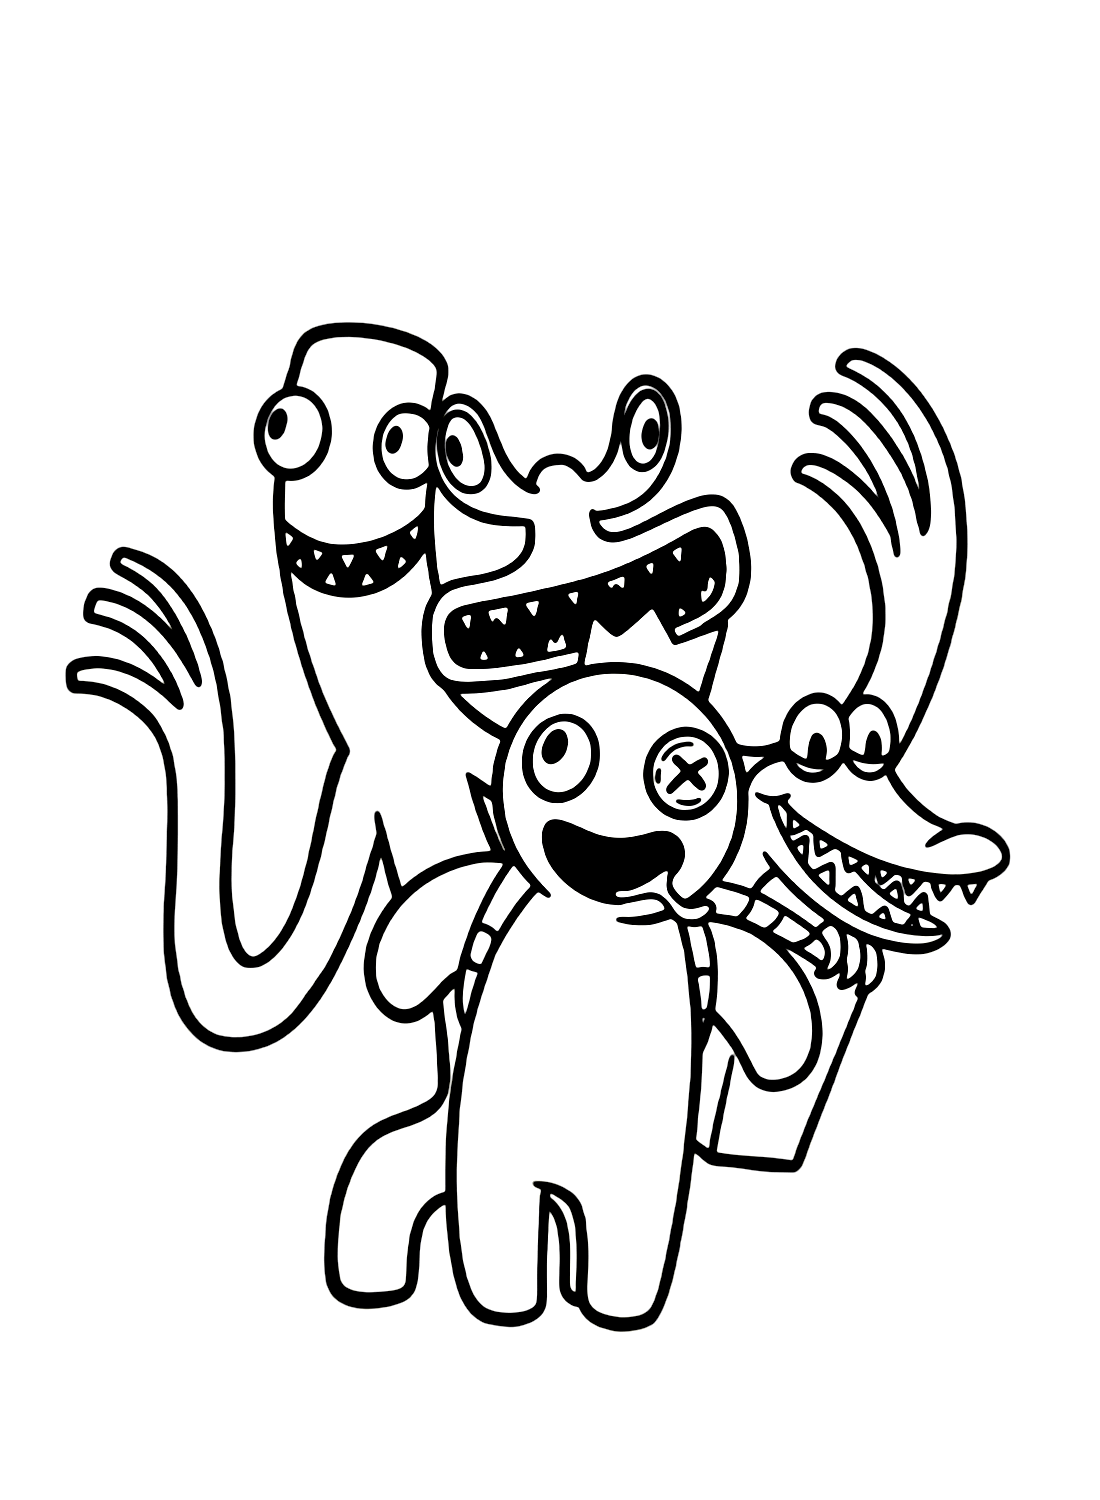 Rainbow Friends Free Coloring Page